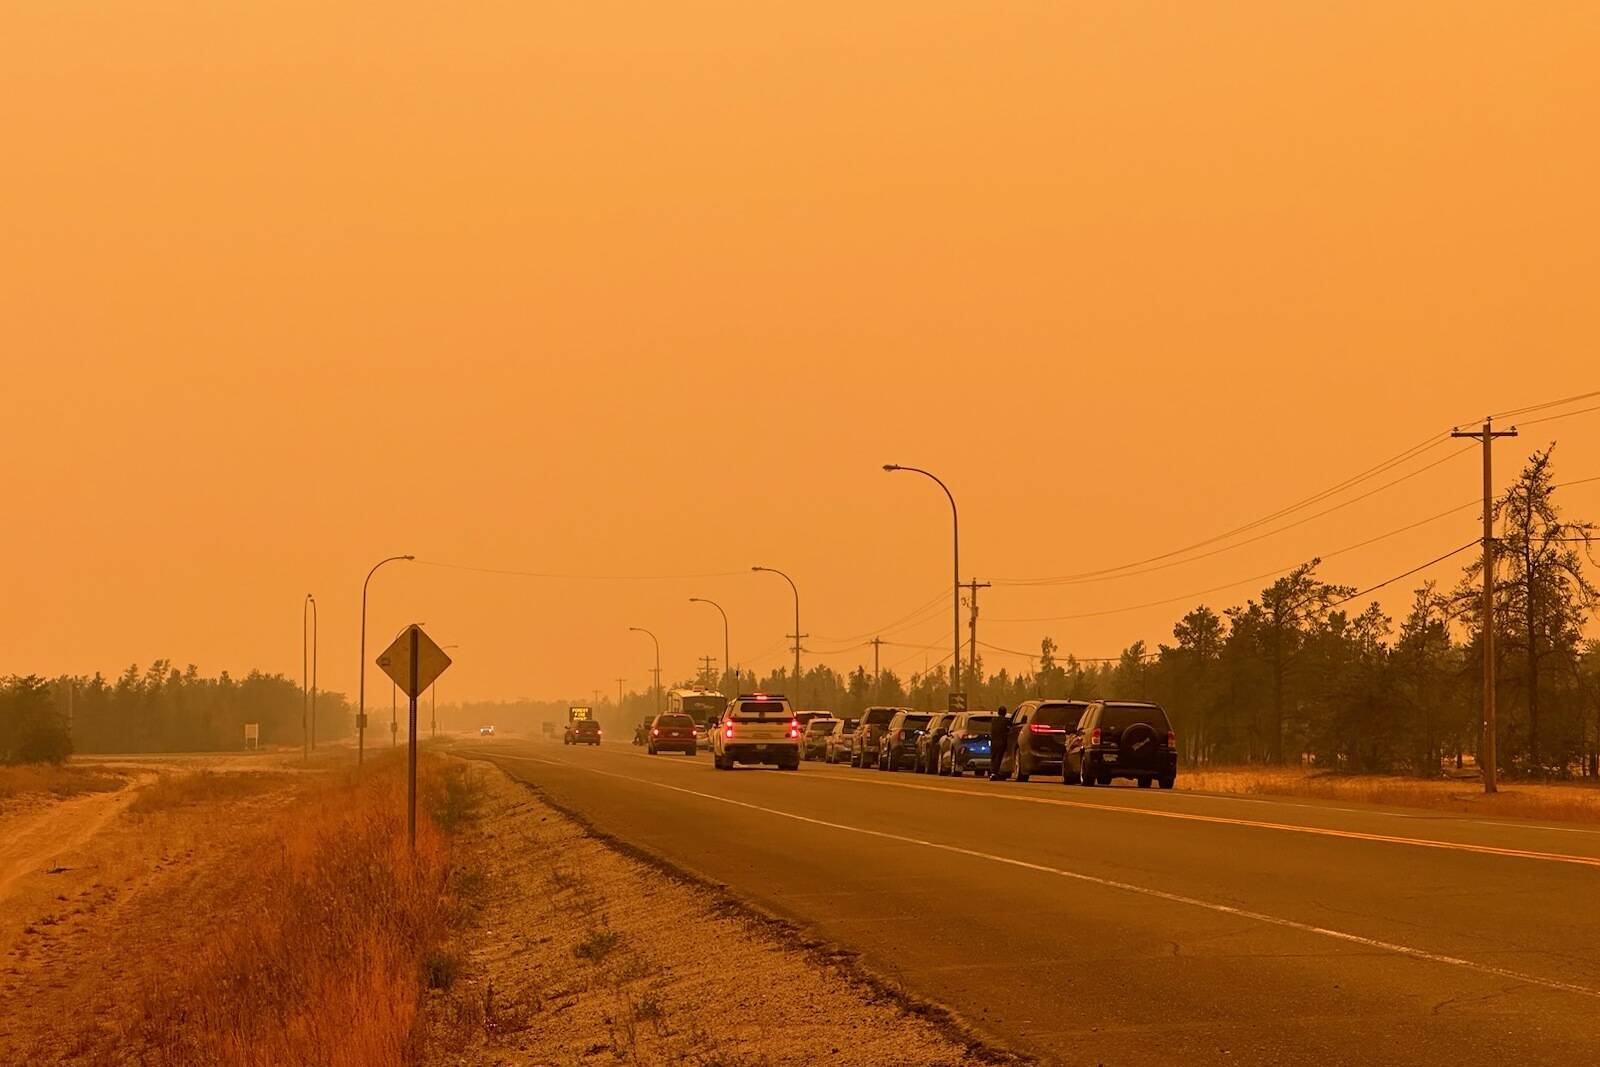 Getting in and out of the southern NWT by vehicle has been complicated by highway closures due to raging wildfires. (Kaicheng Xin/NNSL)